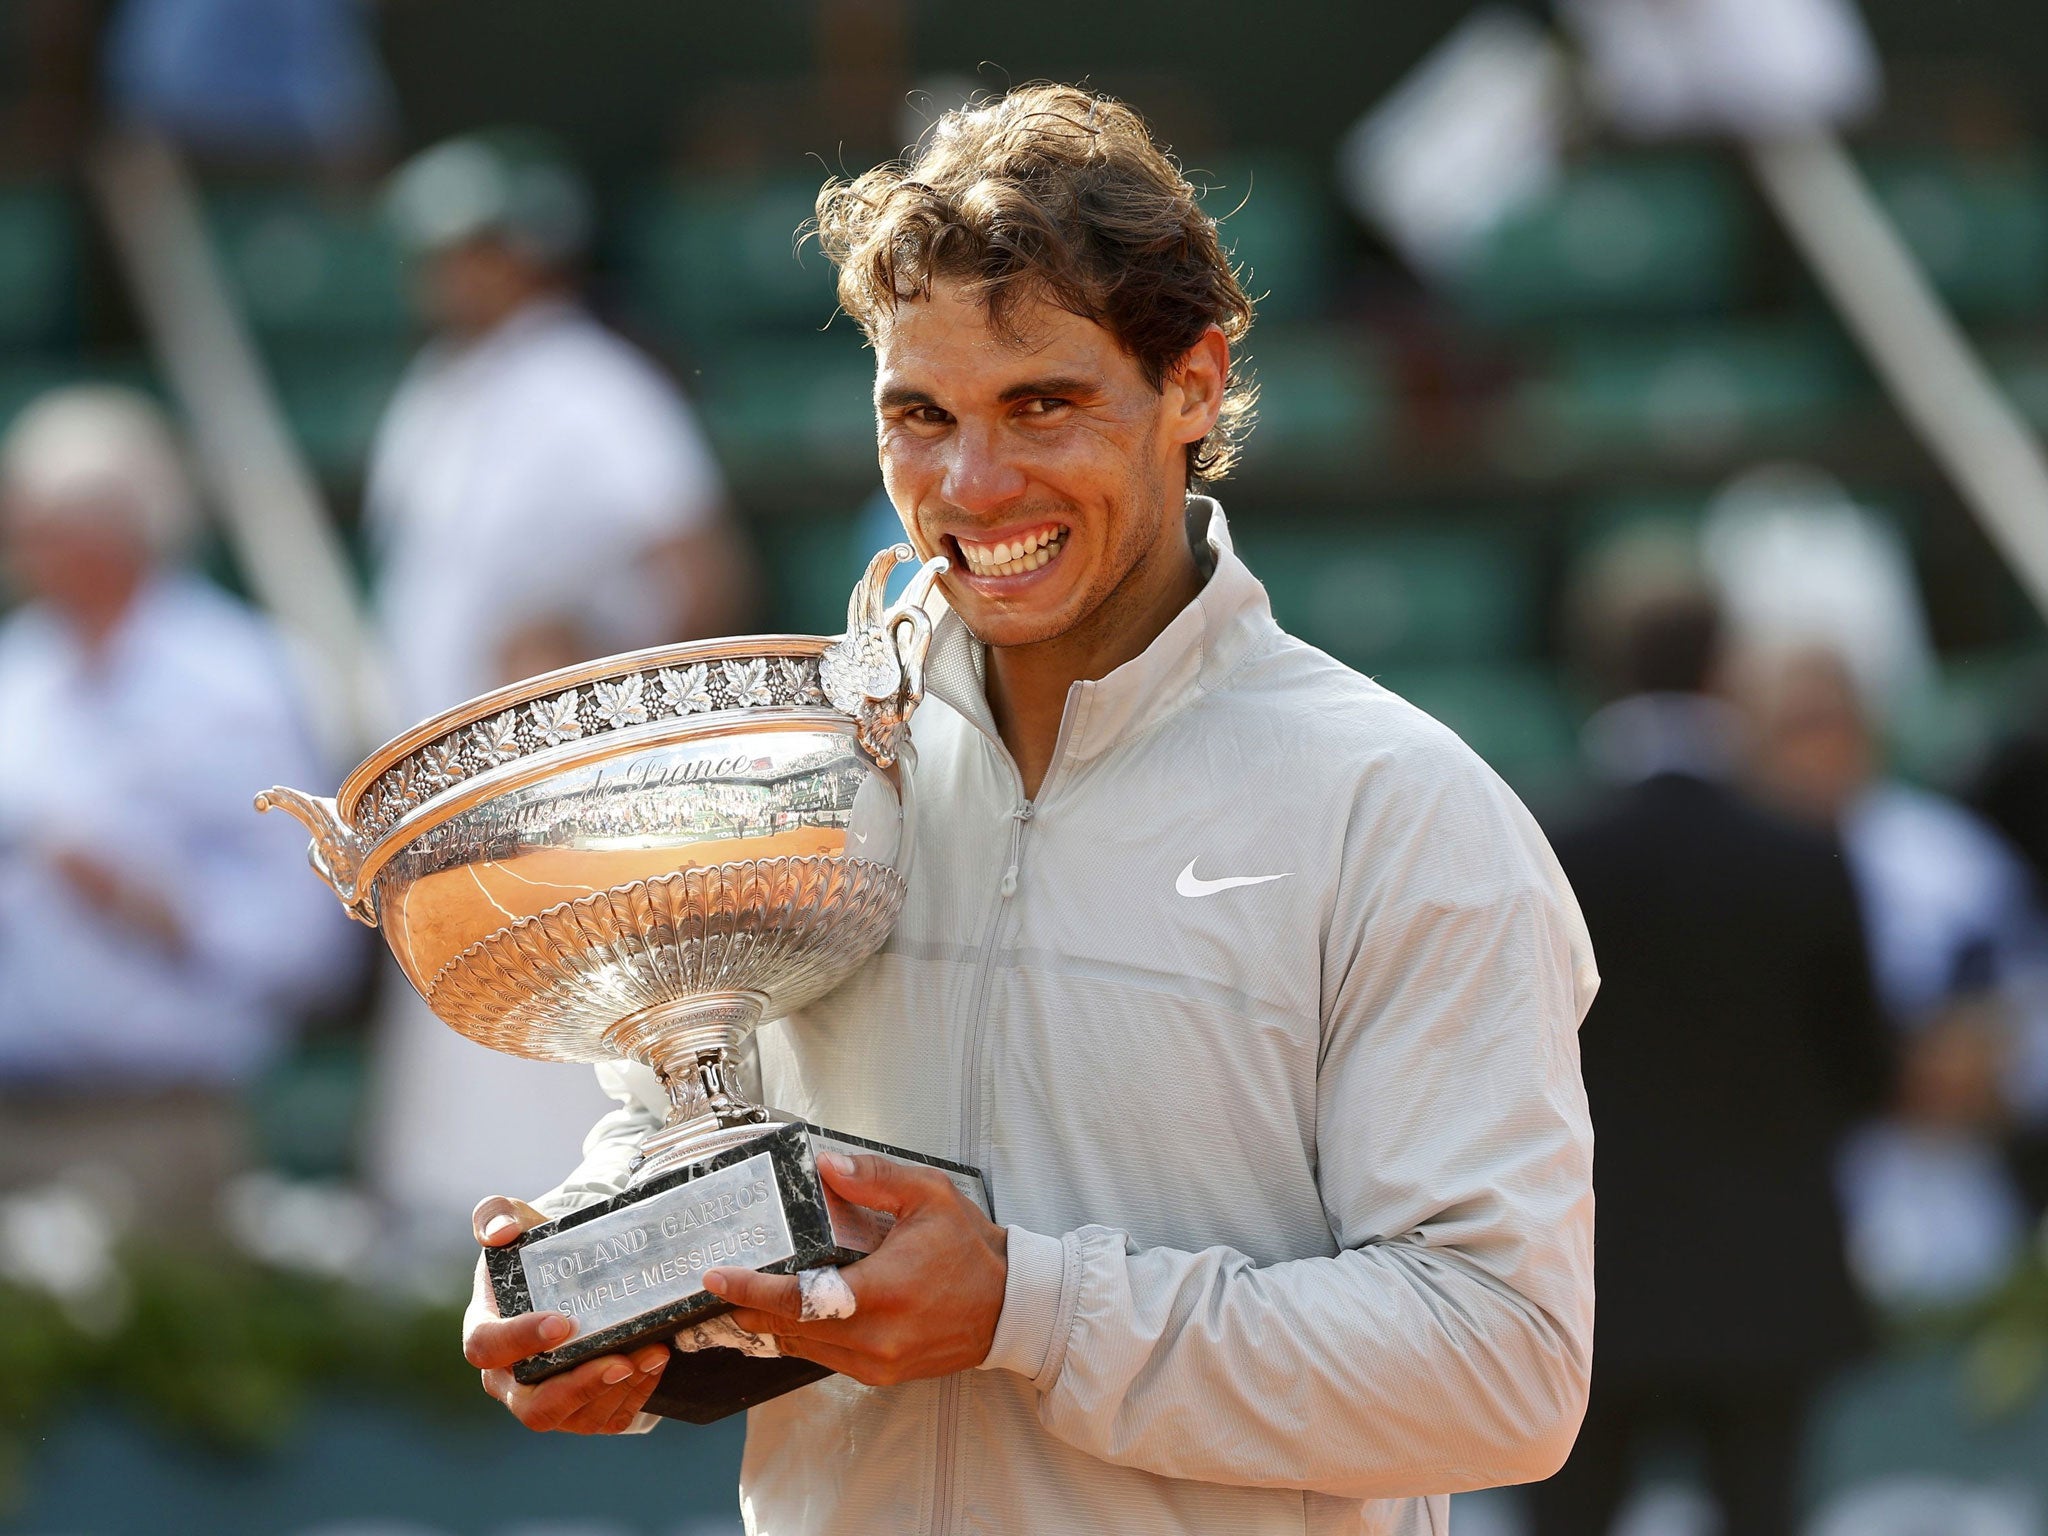 Threat: Rafael Nadal won his 9th French Open title at Roland Garros